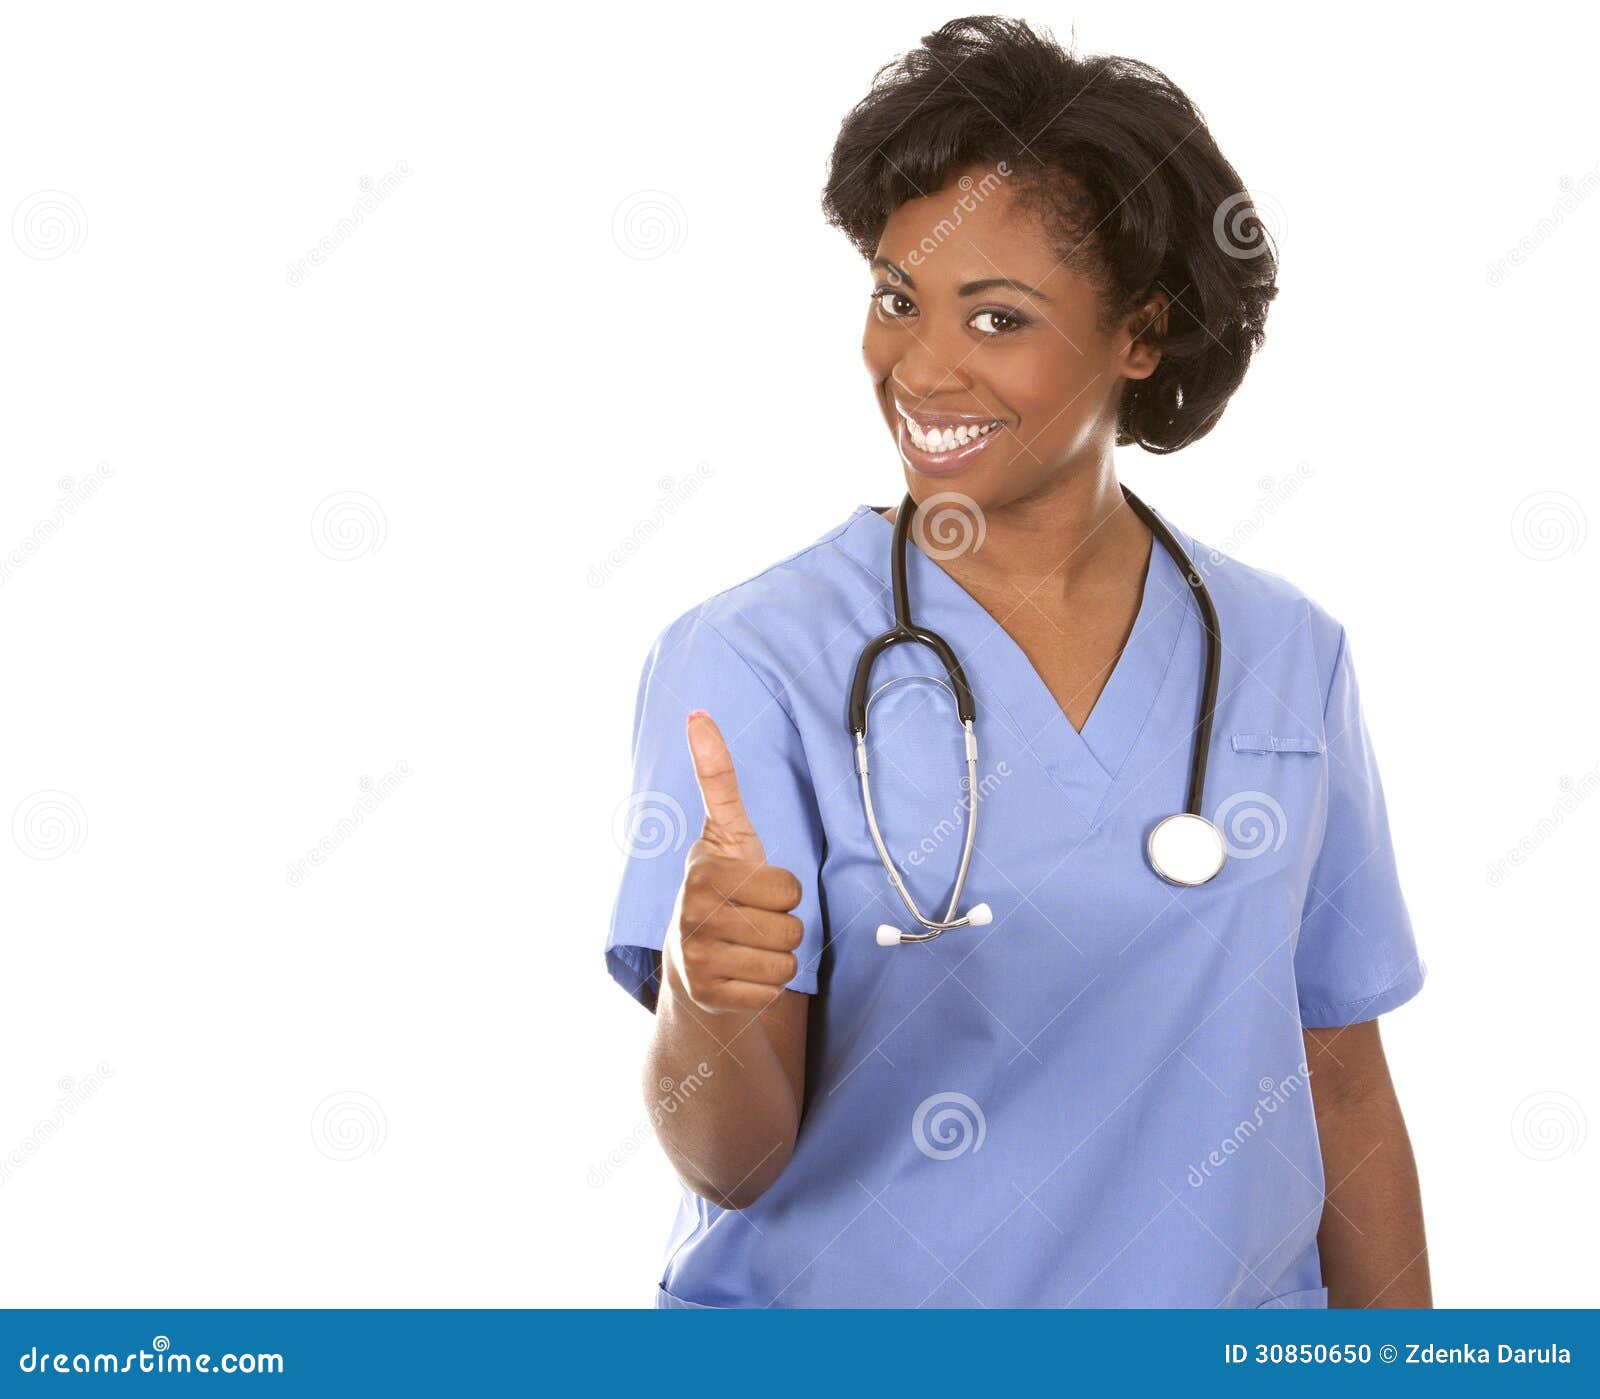 Nurse giving thumbs up stock photo. Image of healthcare - 30850650